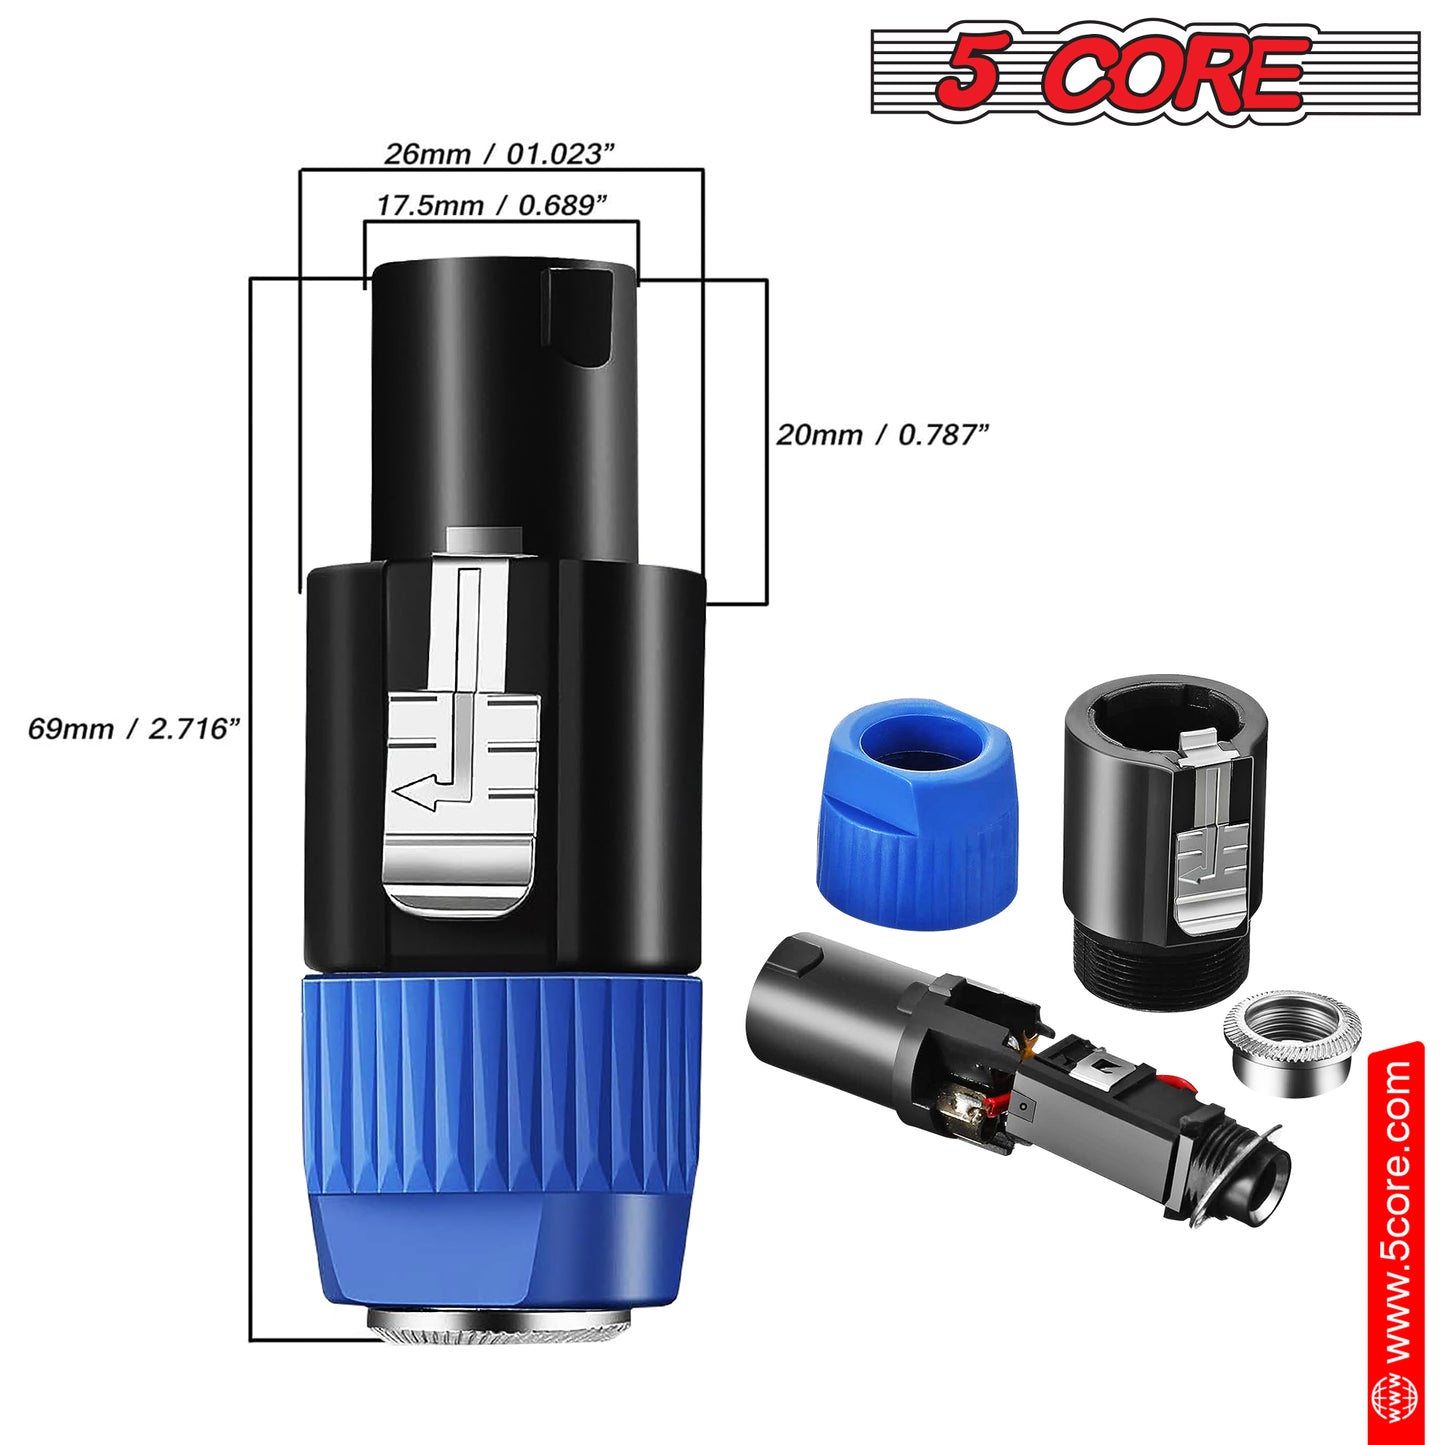 5 Core Speakon To 1/4 Adapter Connector, Upgraded 1/4 Female To Male Connector Speaker SPKN M-1/4 ADP F 1PC